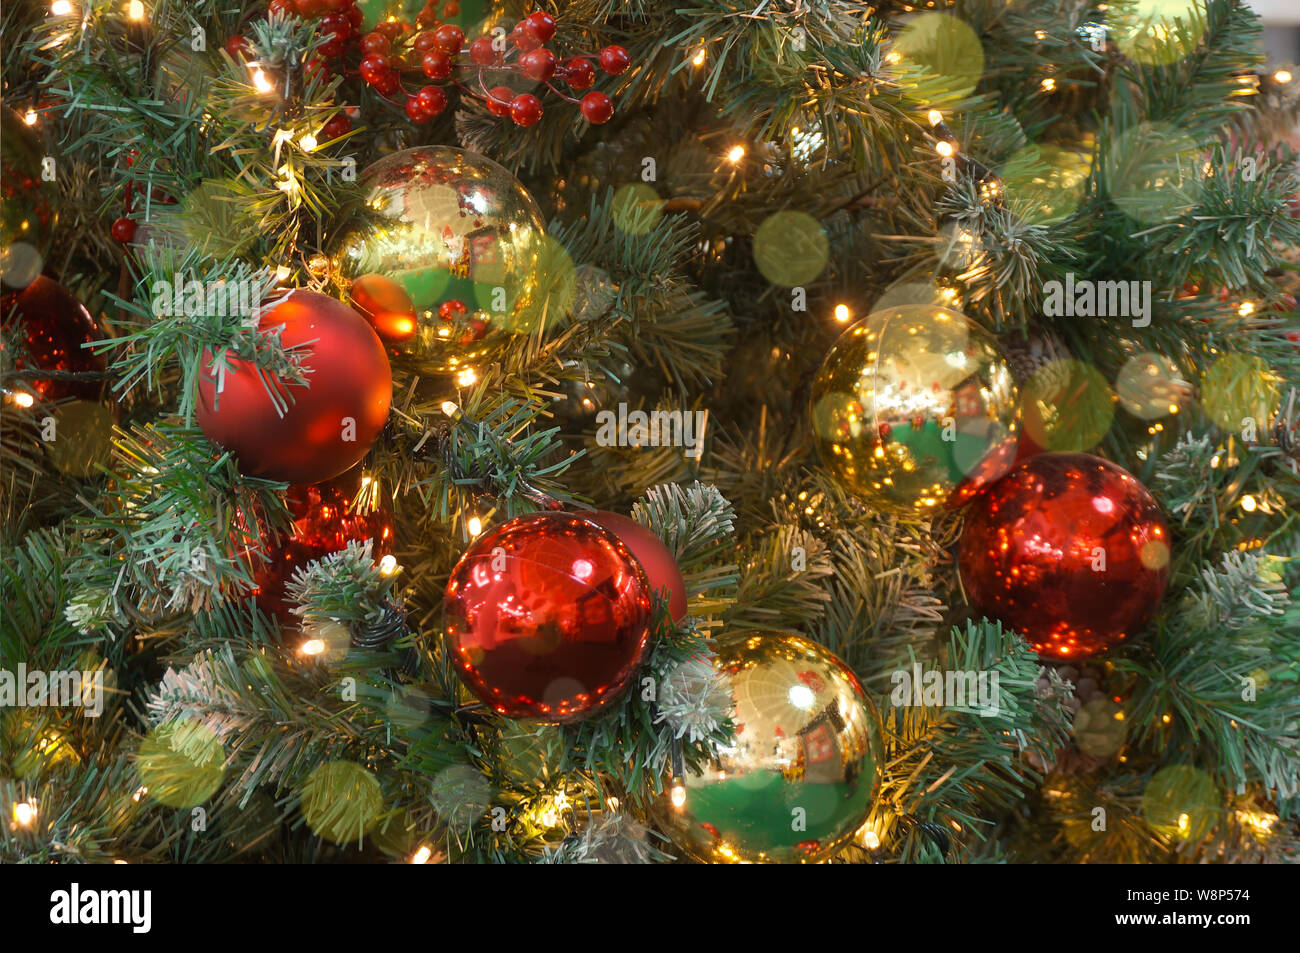 Christmas background with festive decoration and text - Merry Christmas Stock Photo